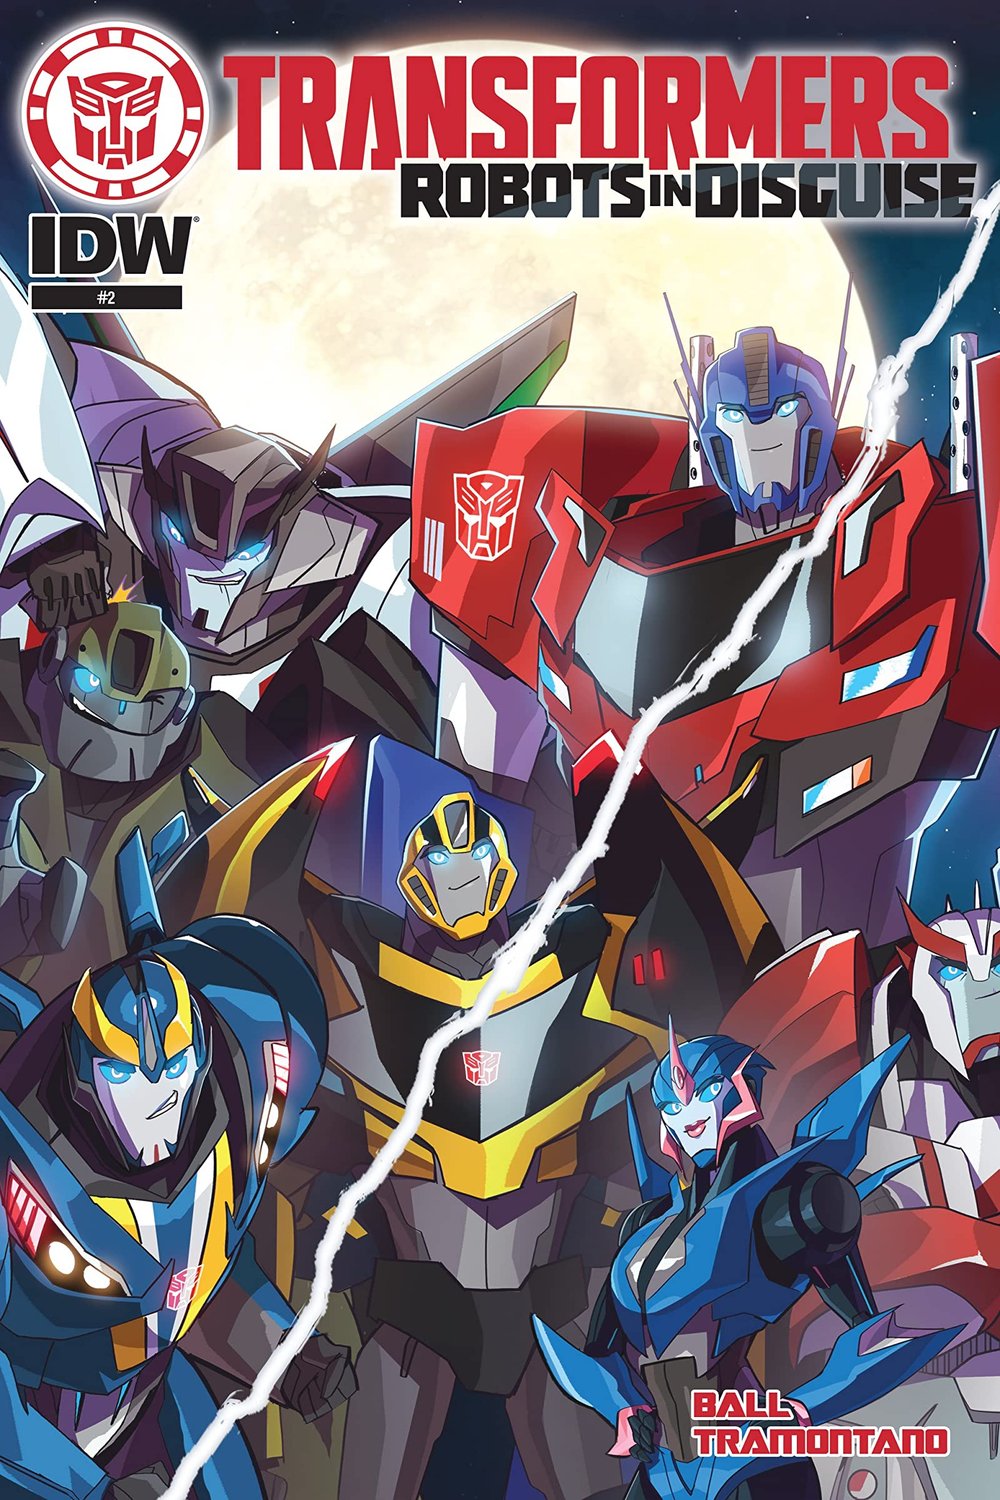 Poster of the movie Transformers: Robots in Disguise